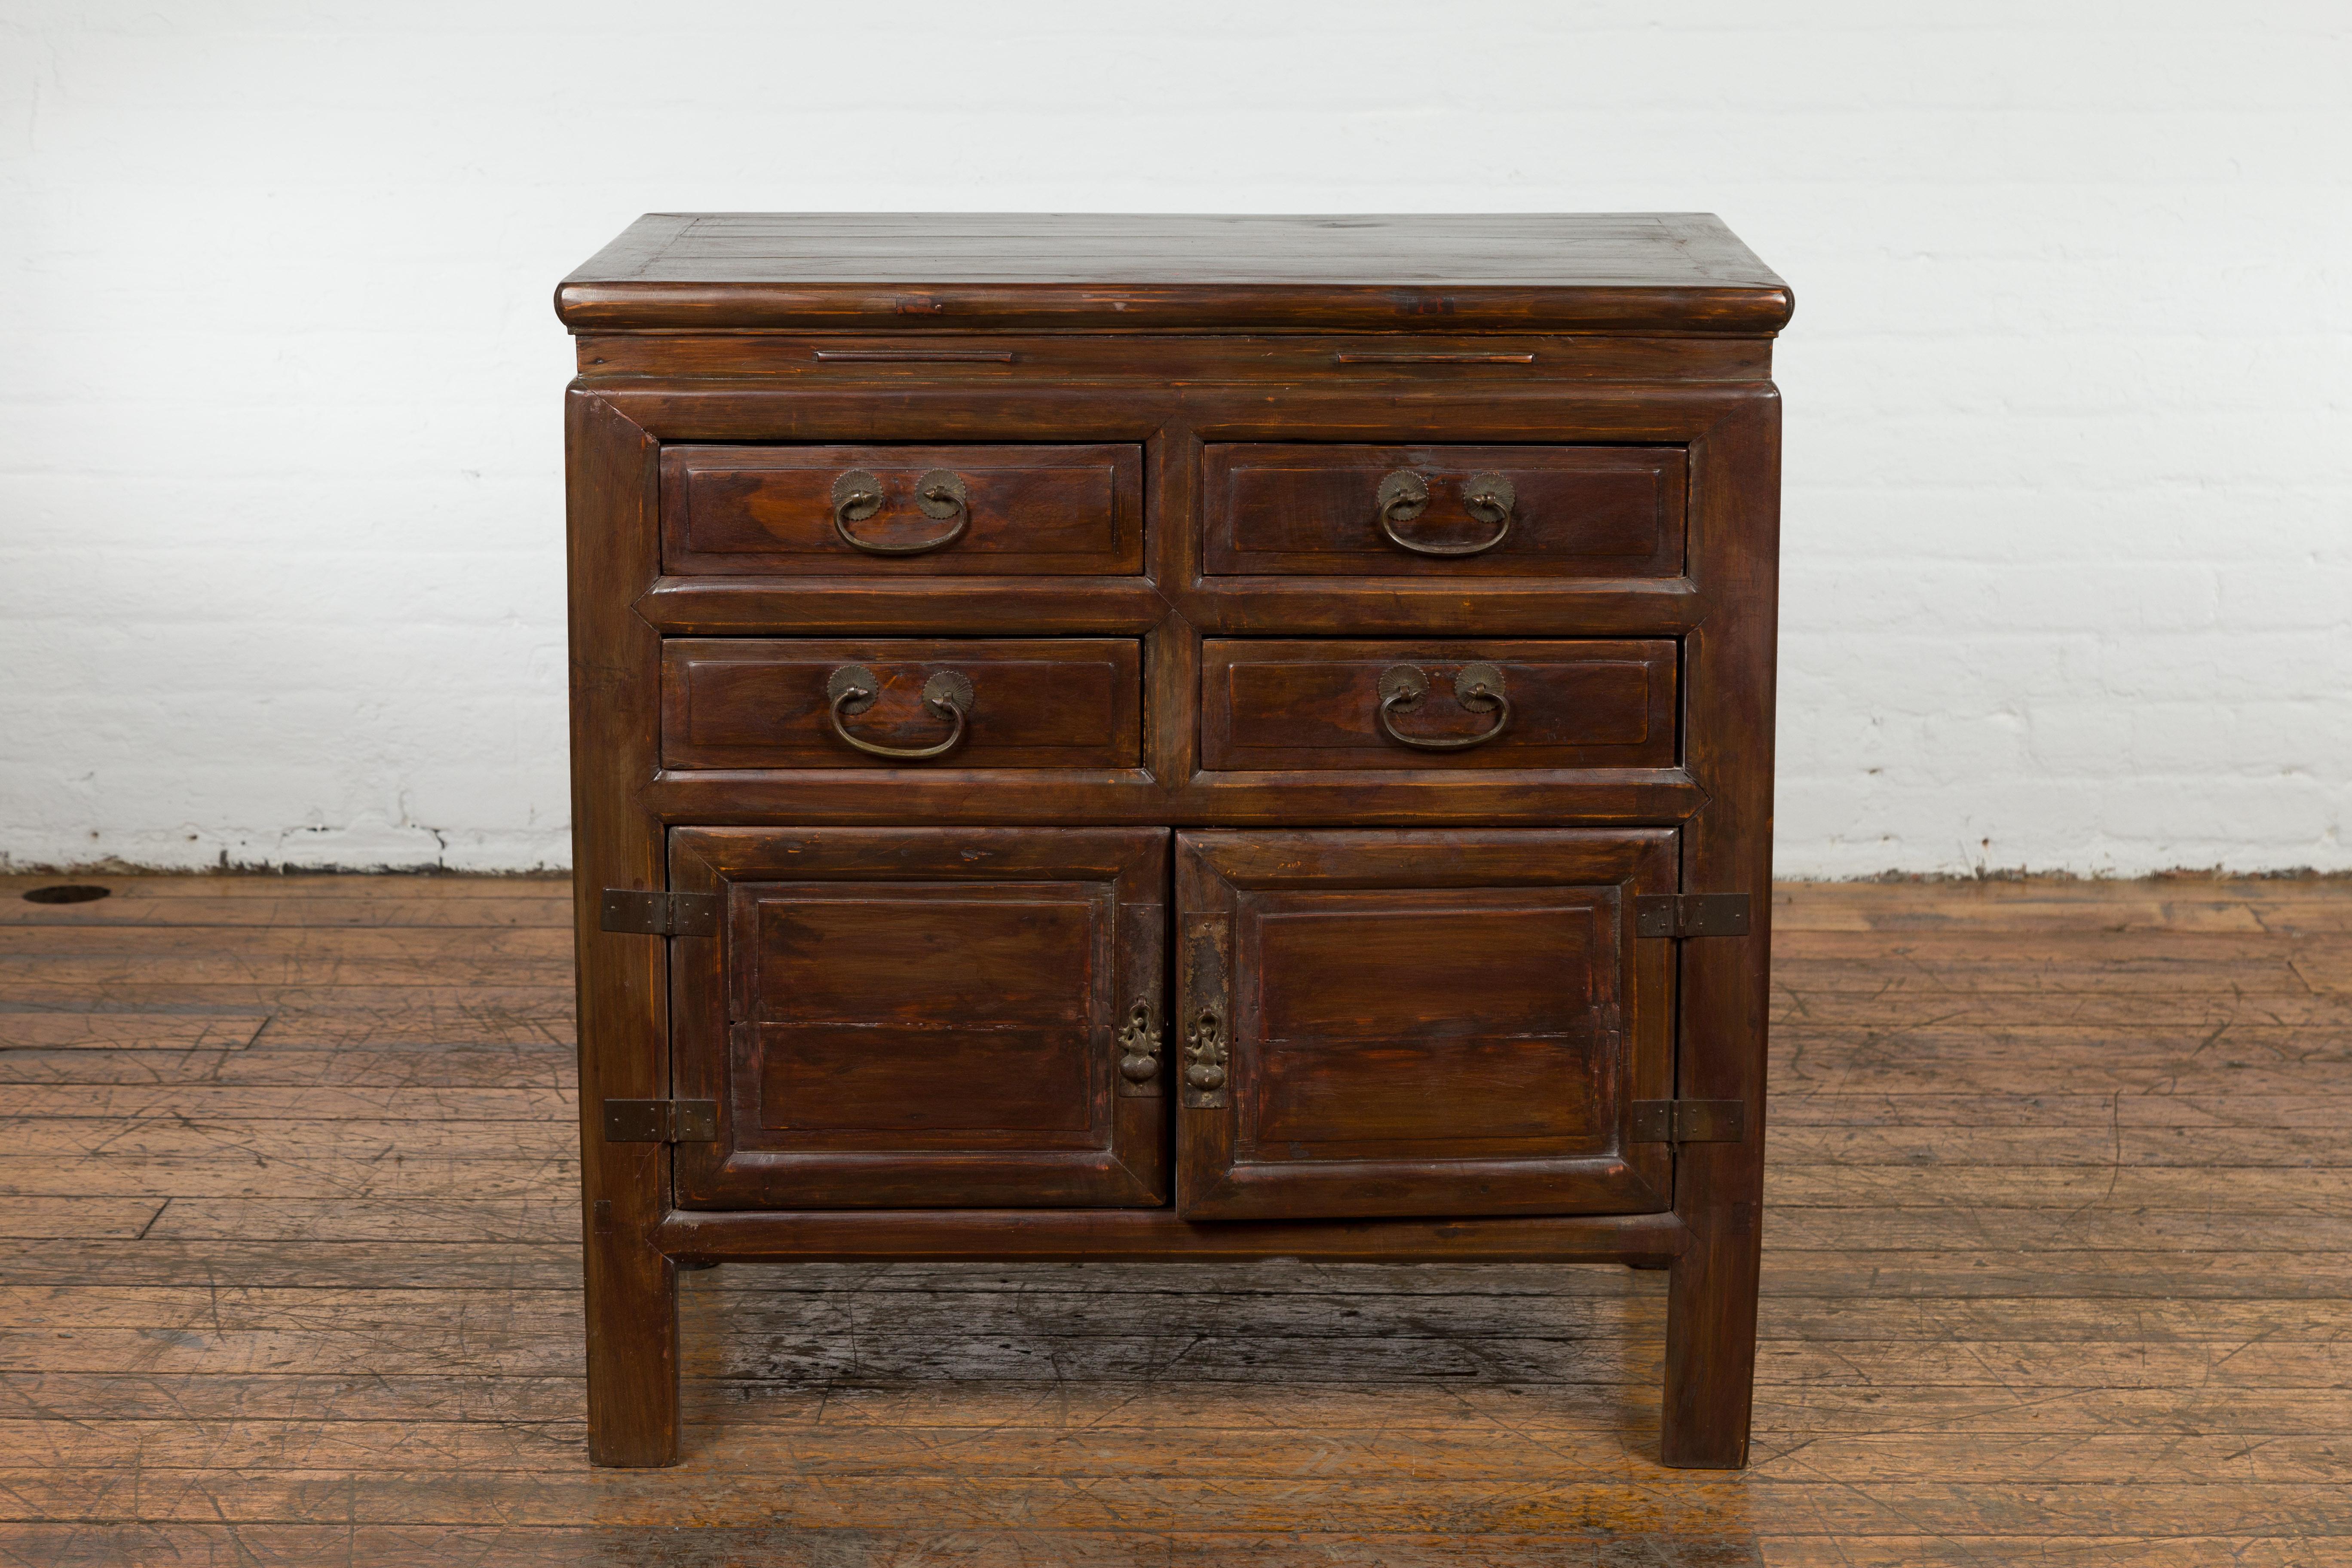 A Chinese late Qing Dynasty period bedside cabinet from the early 20th century with four drawers and double doors. This late Qing Dynasty period bedside cabinet exudes charm from the early 20th century. Crafted with precision, this Chinese piece